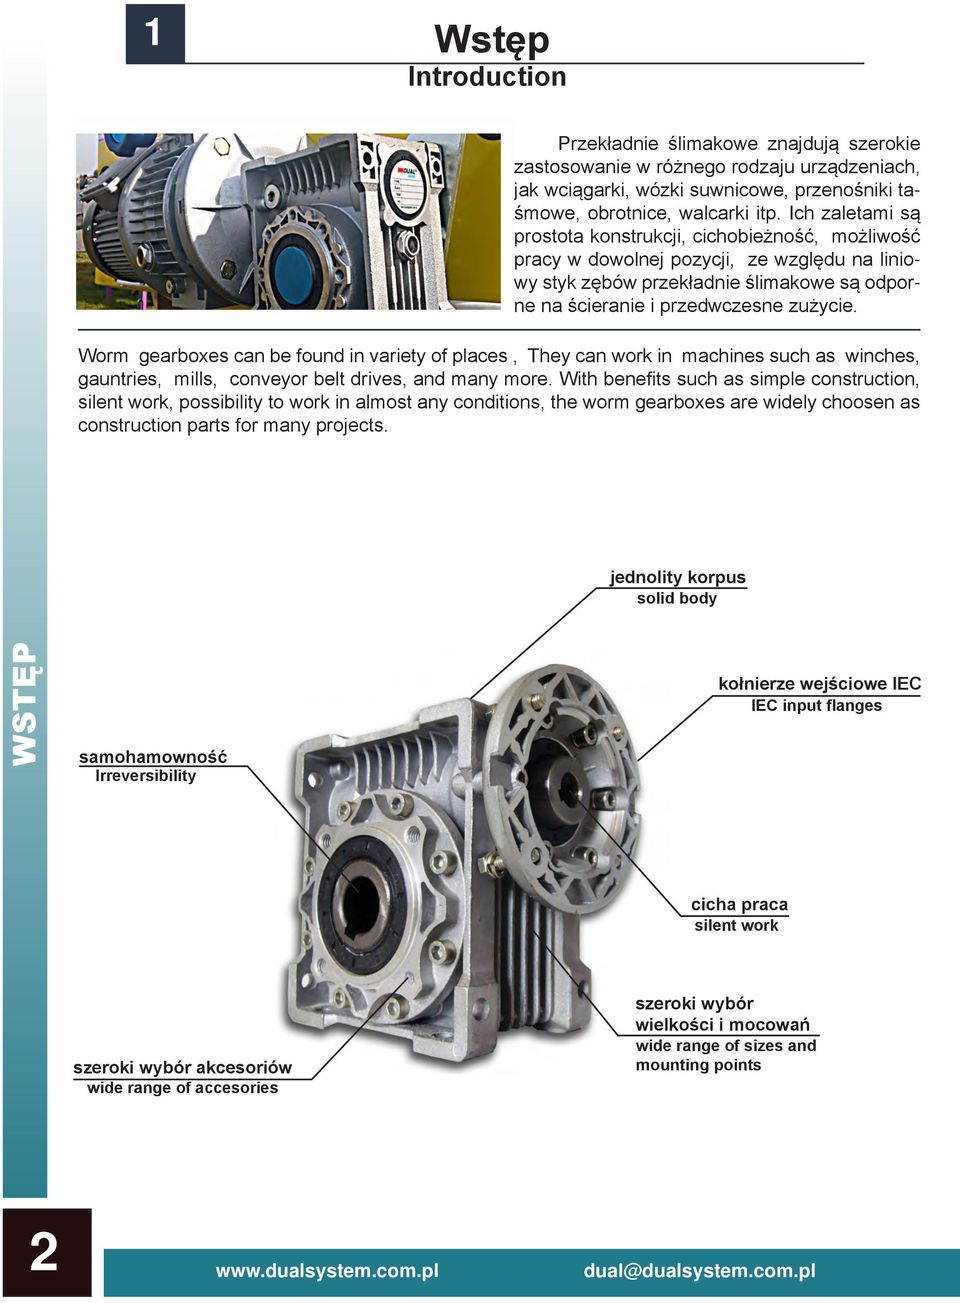 Worm gearboxes can be found in variety of places, They can work in machines such as winches, gauntries, mills, conveyor belt drives, and many more.